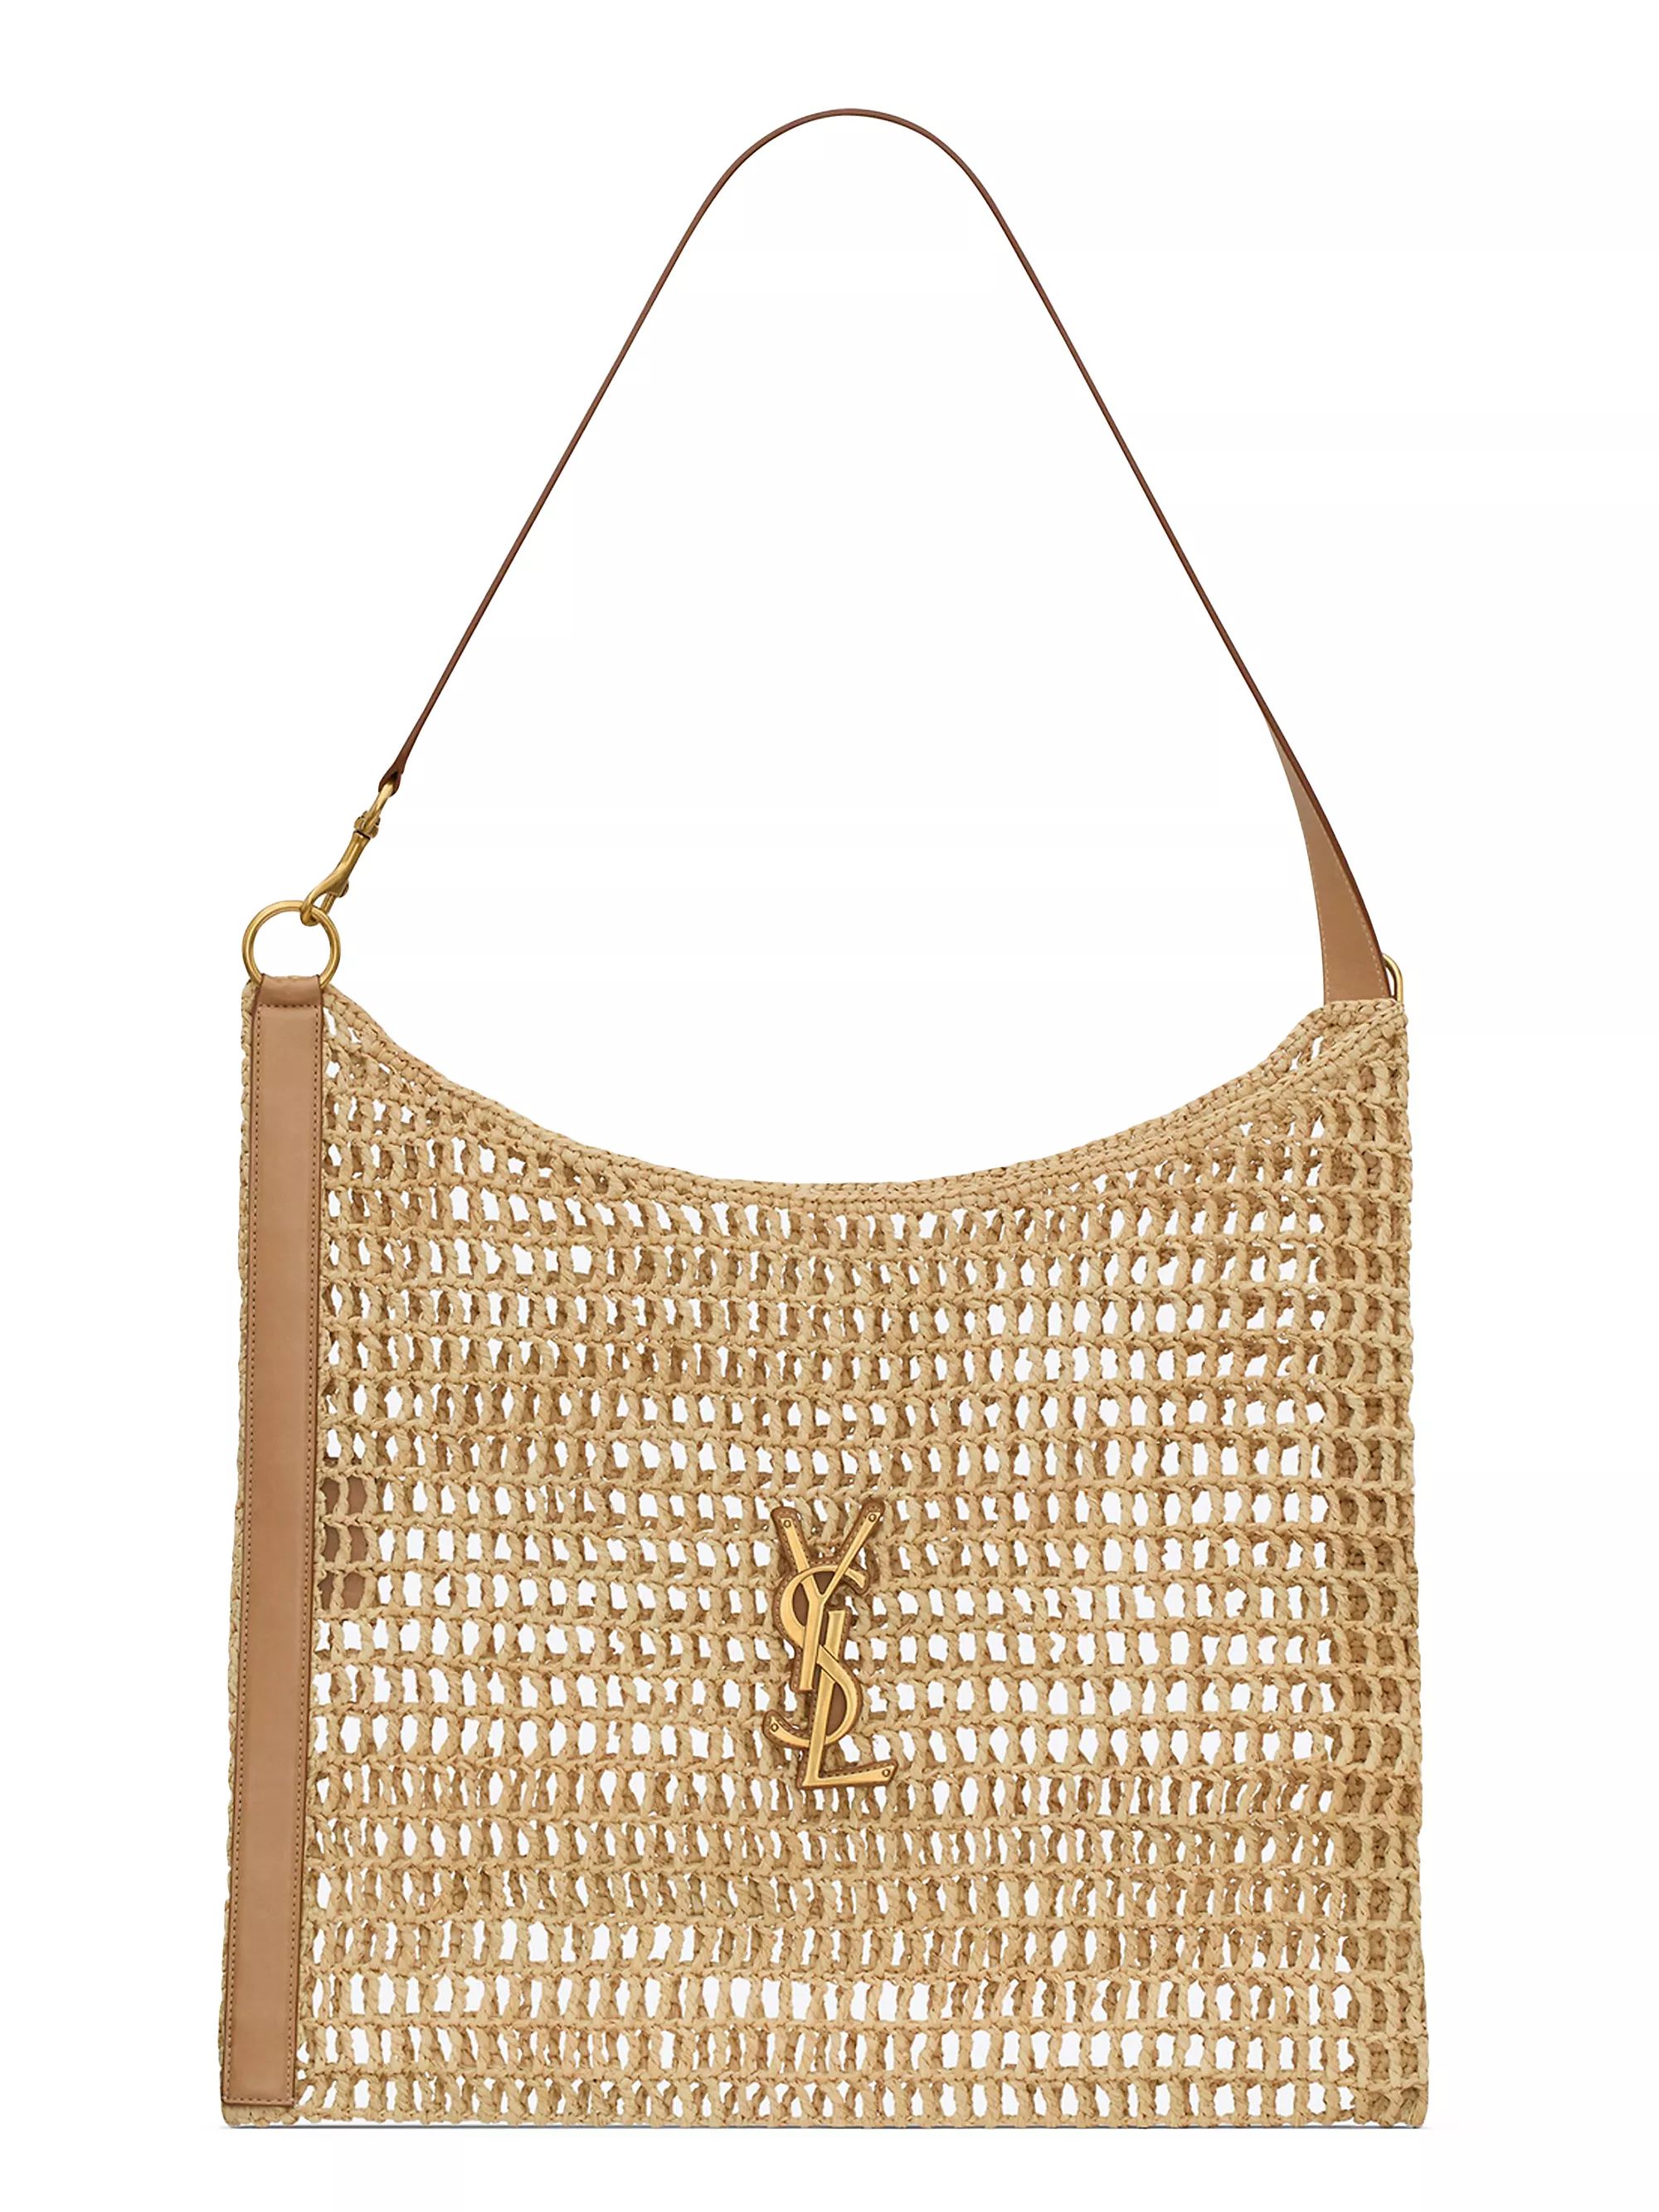 NaturalAll Shoulder BagsSaint LaurentOxalis in Raffia Crochet and Vegetable-Tanned Leather$2,390
... | Saks Fifth Avenue